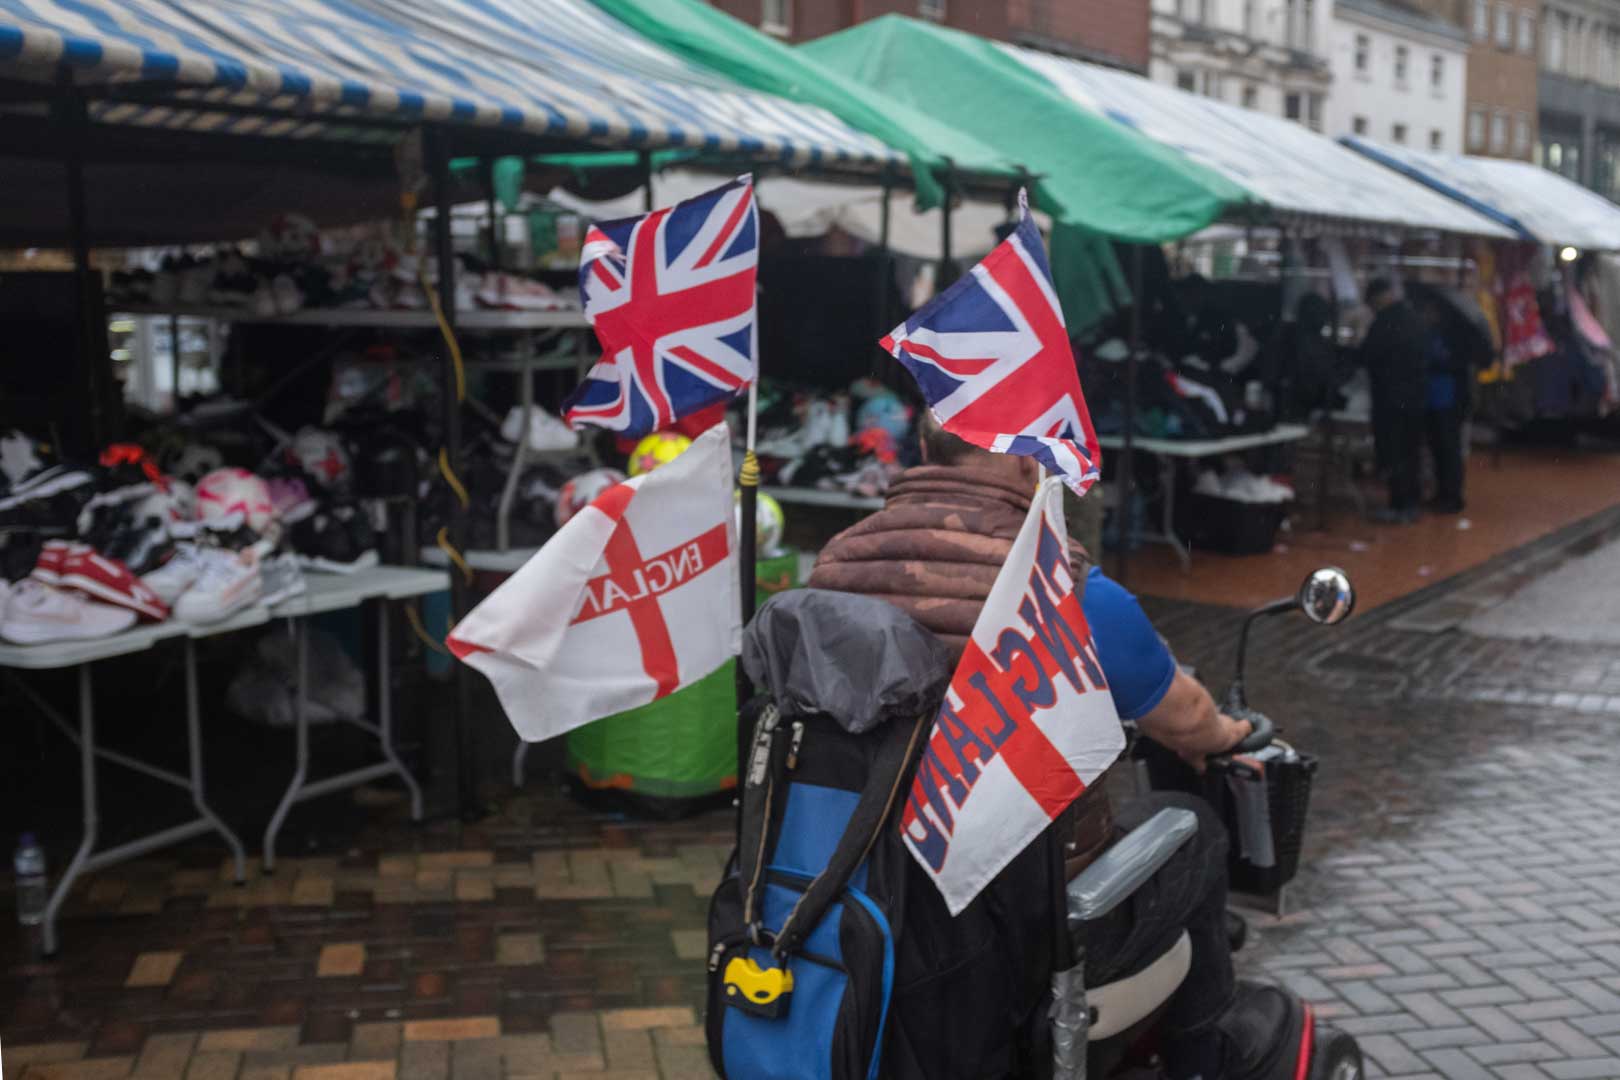 A person in a mobility scooter, flying Union Jacks and England flags, driving passed market stalls.